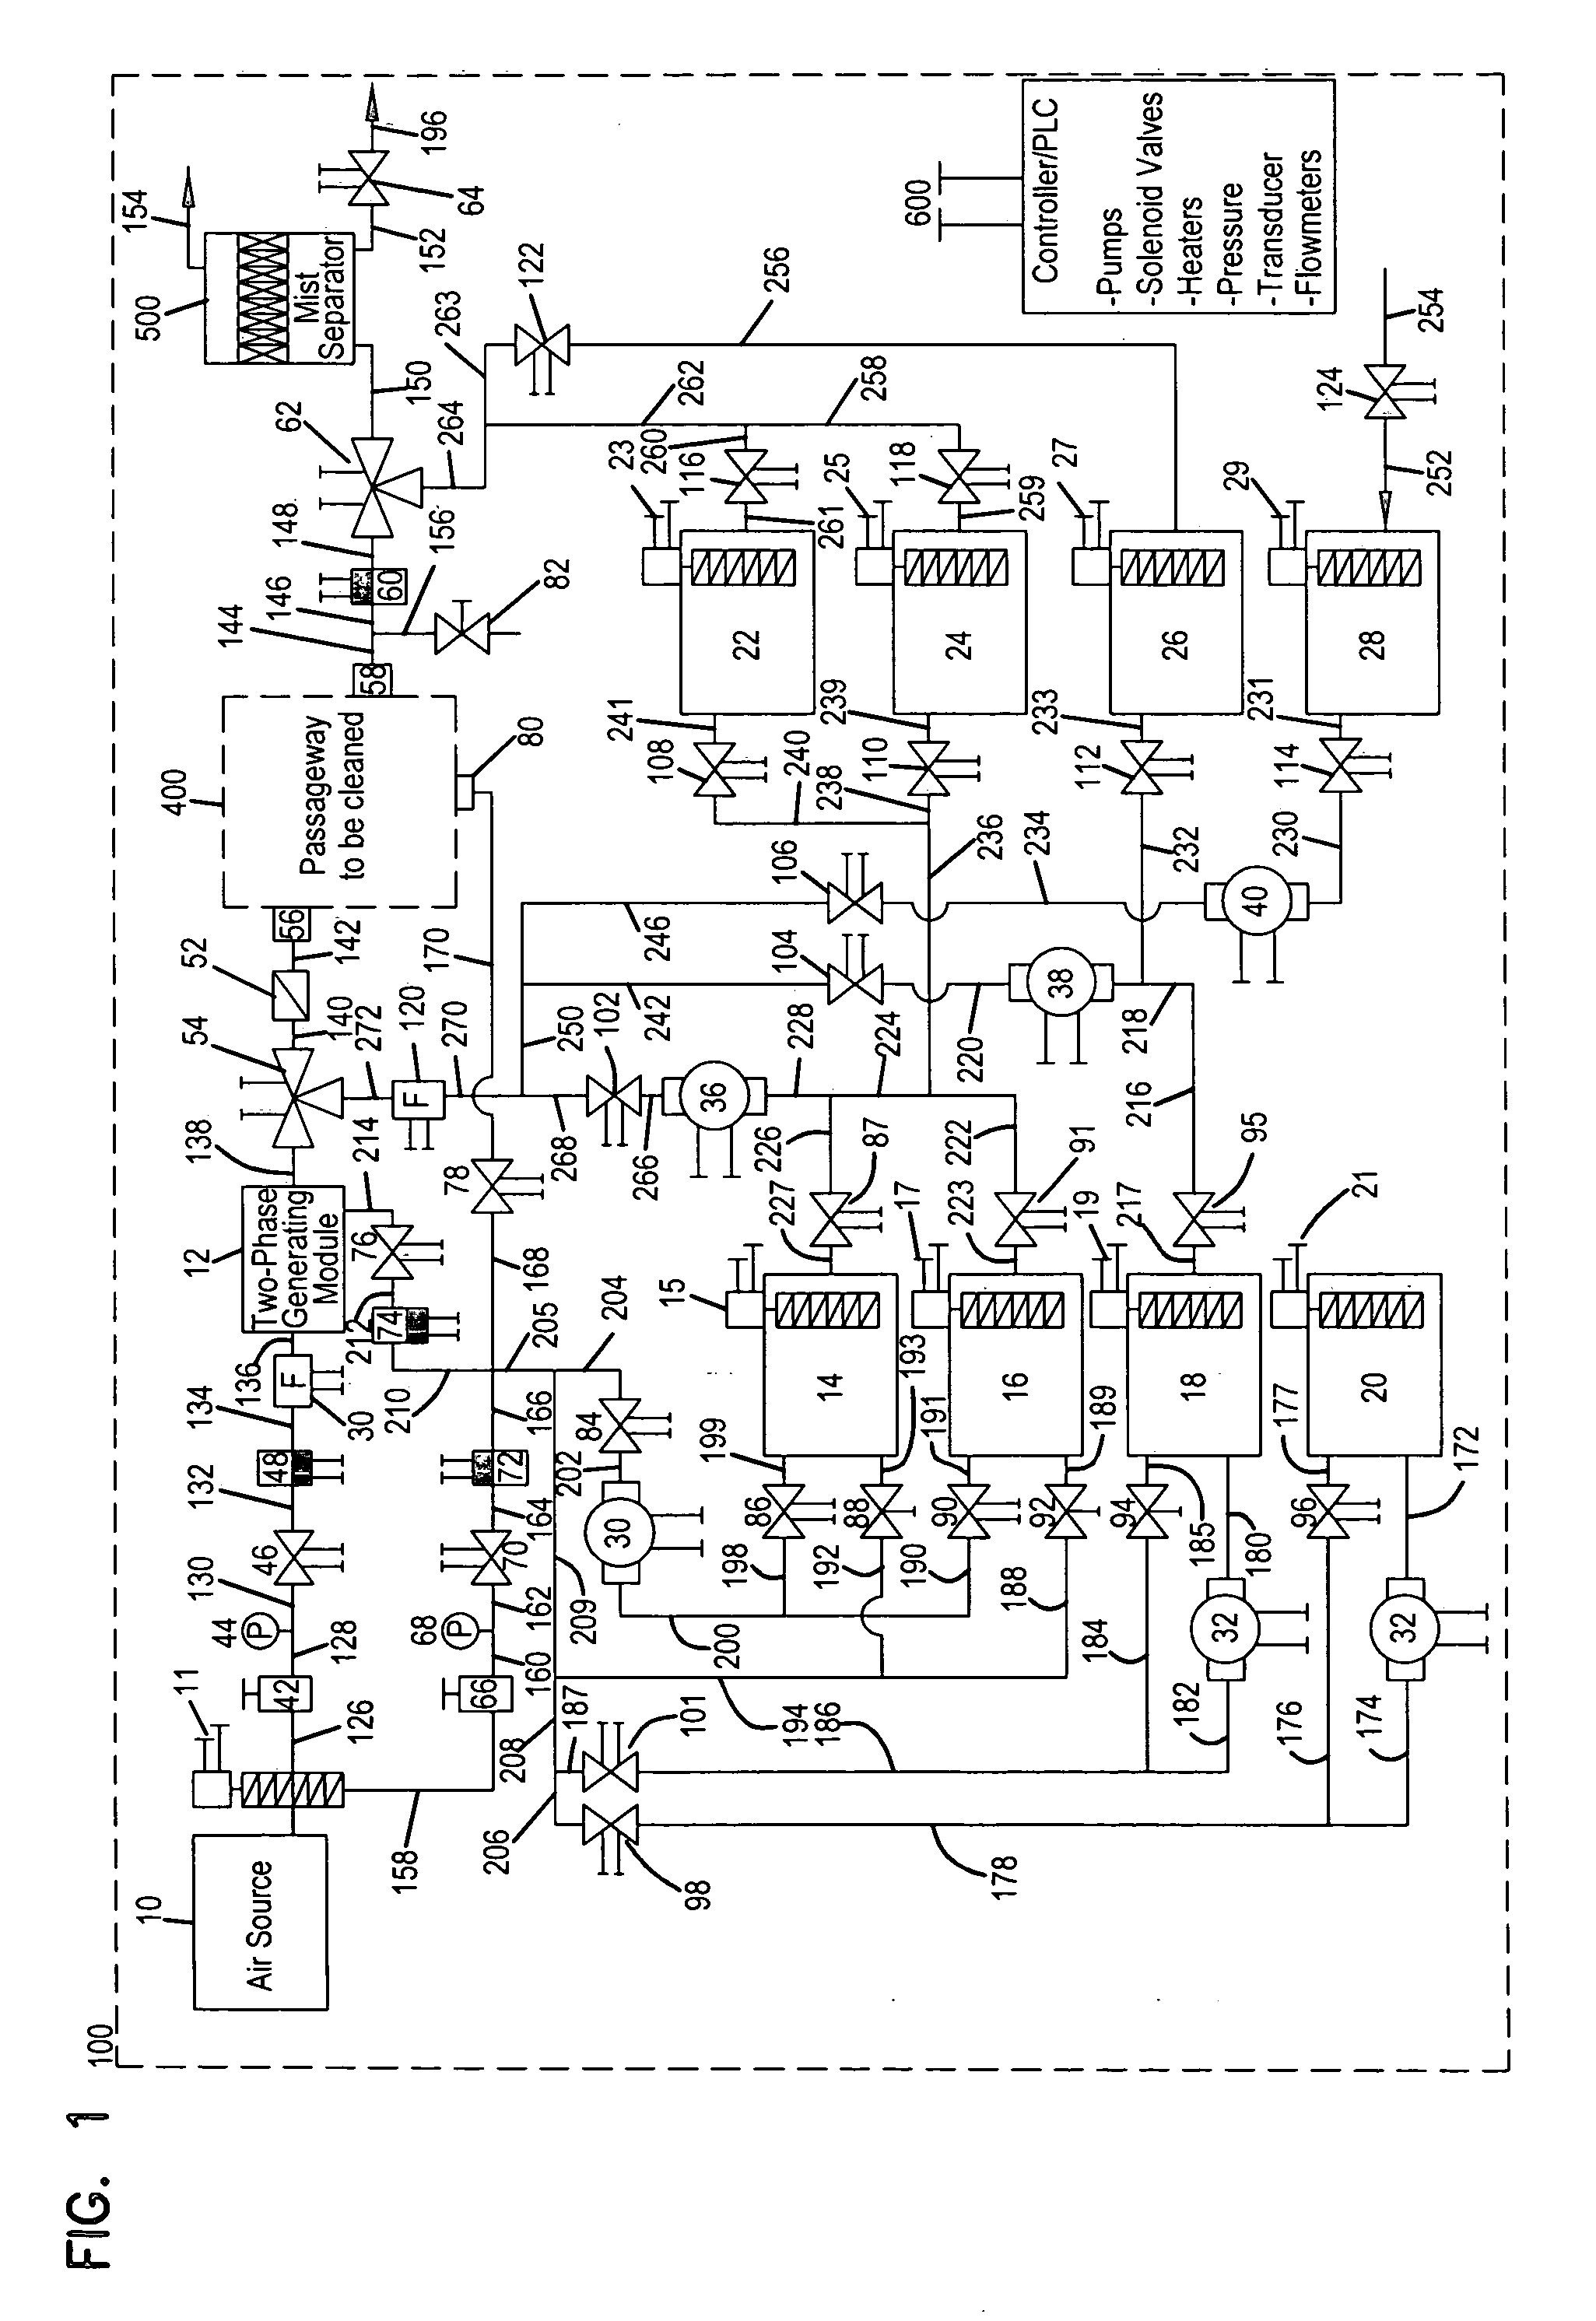 Apparatus and method for cleaning pipelines, tubing and membranes using two-phase flow